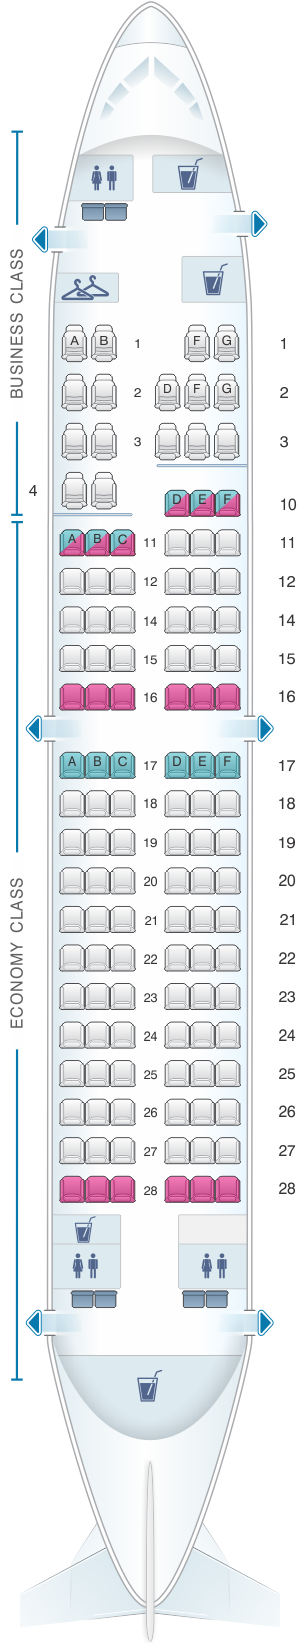 Seat map for Transaero Airlines Boeing B737 700